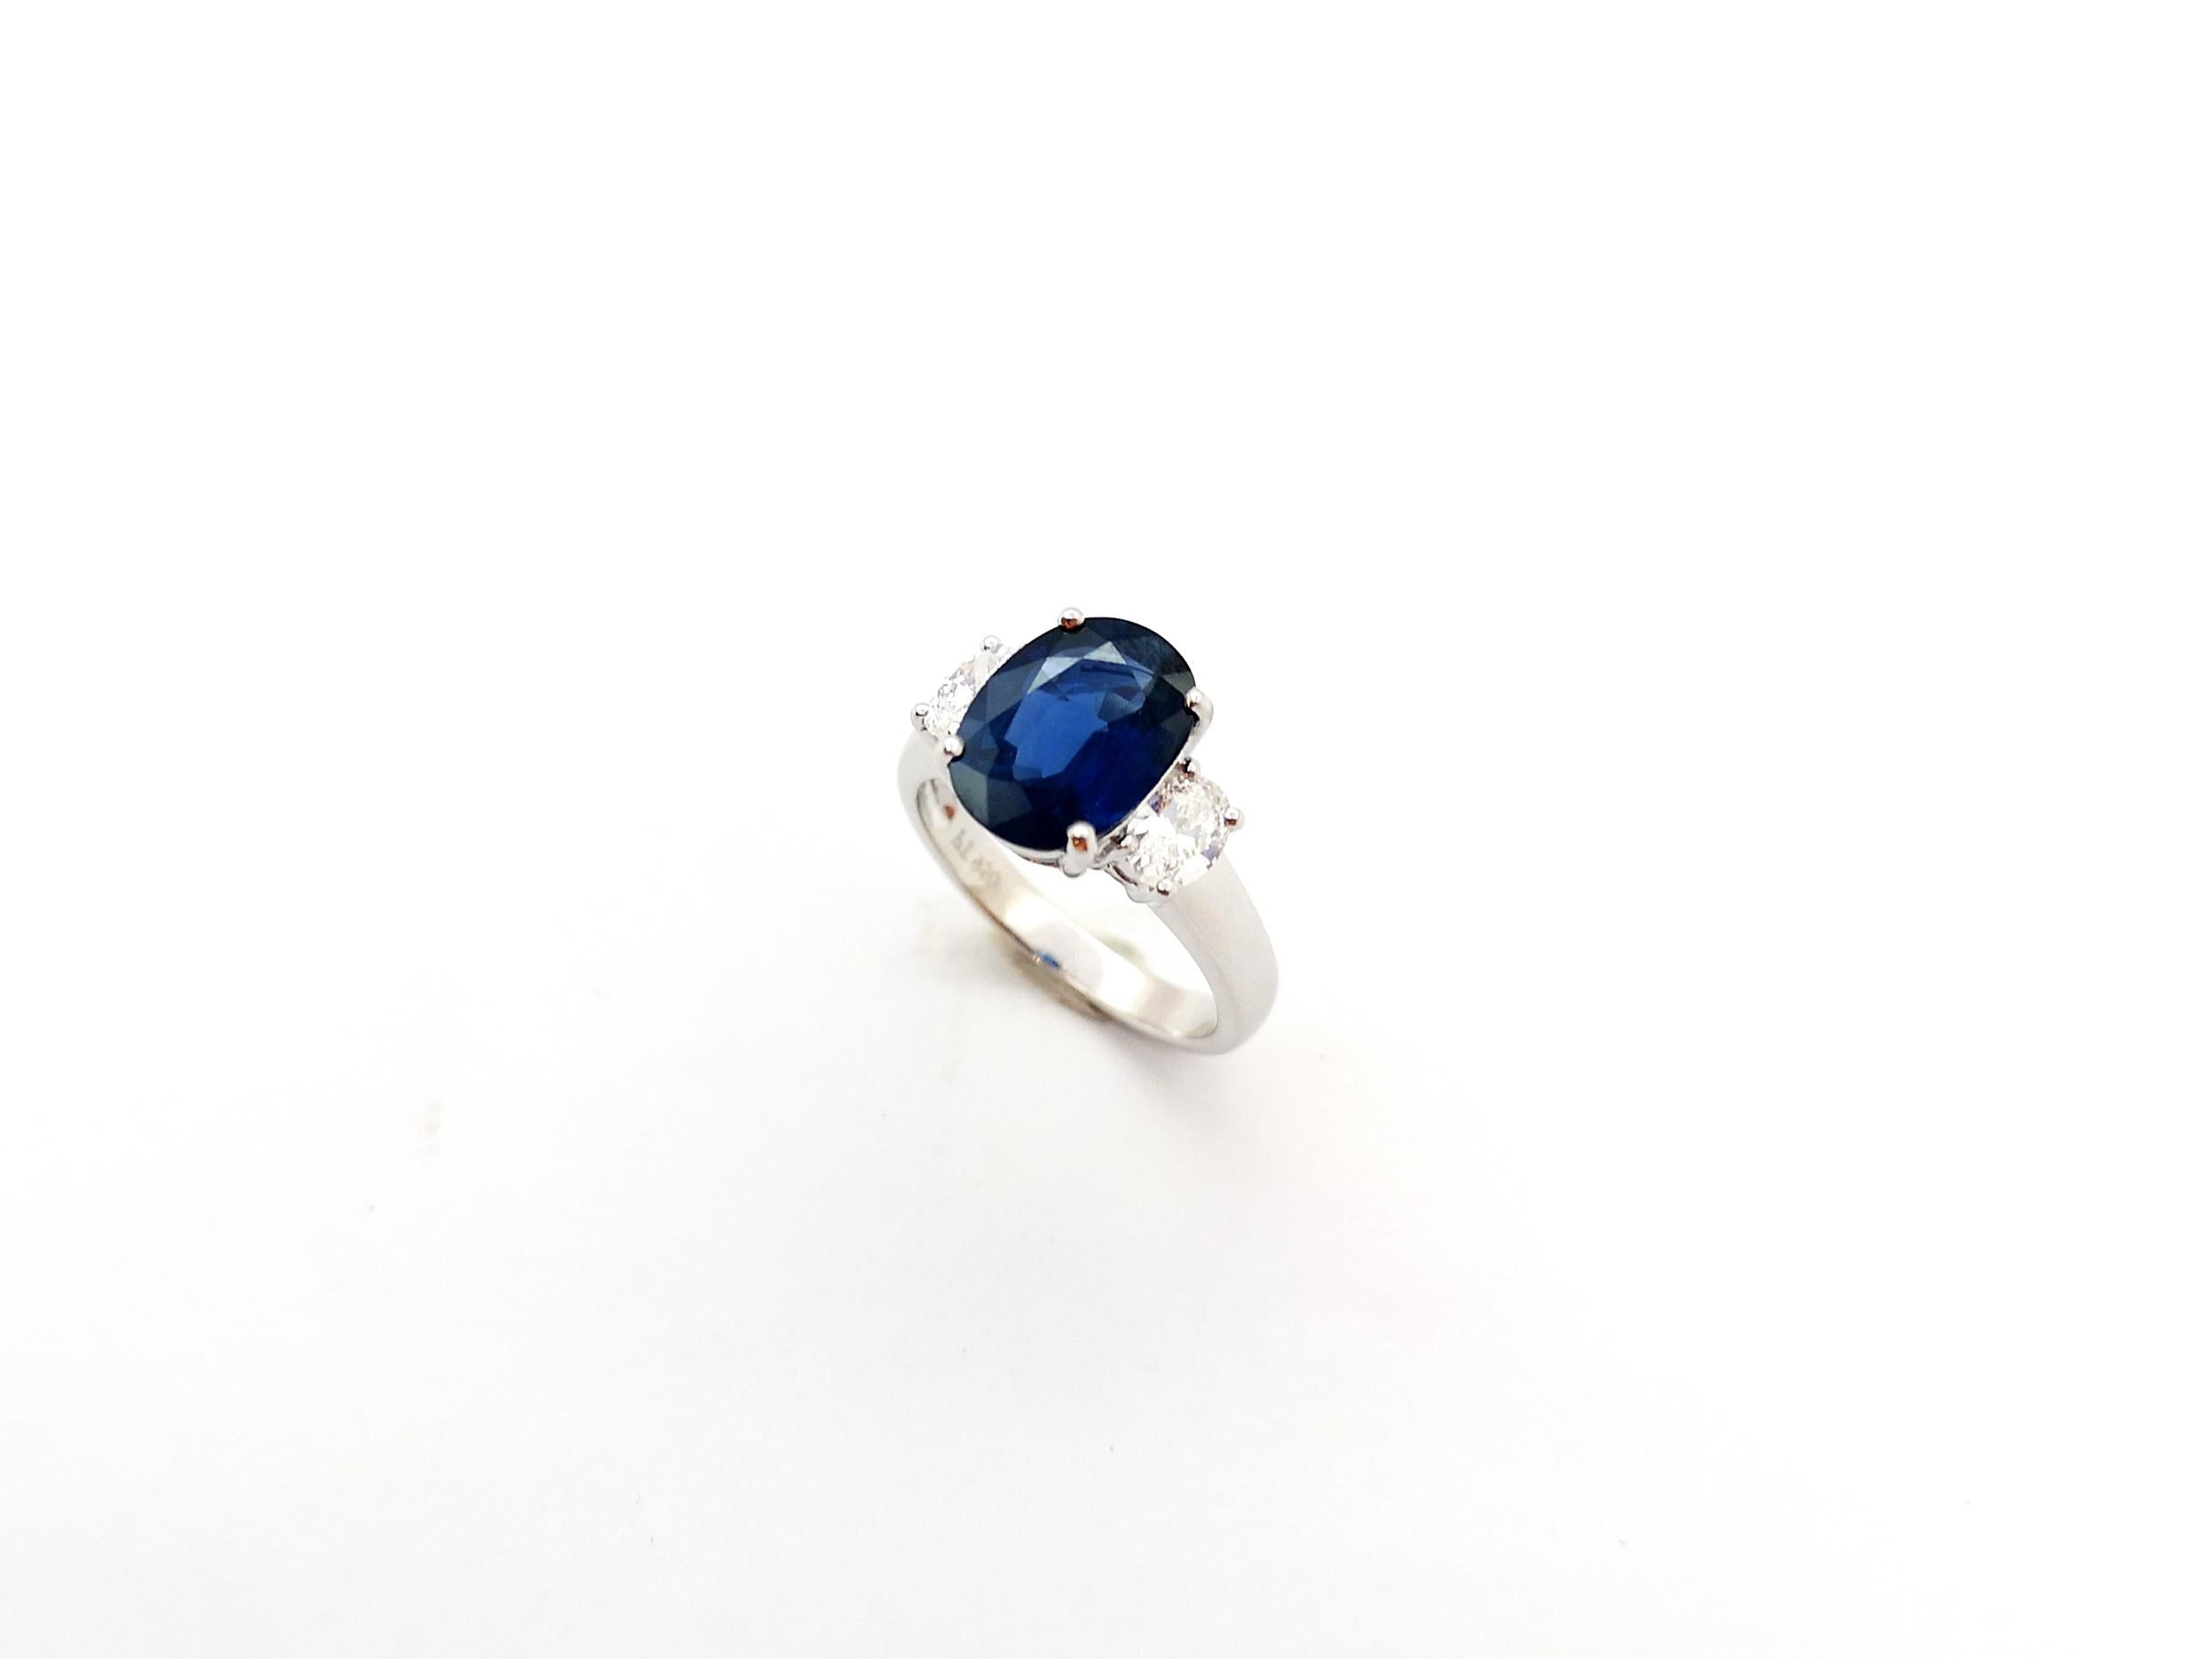 GIA Certified 3.89 cts Blue Sapphire with Diamond Ring set in Platinum 950  For Sale 9